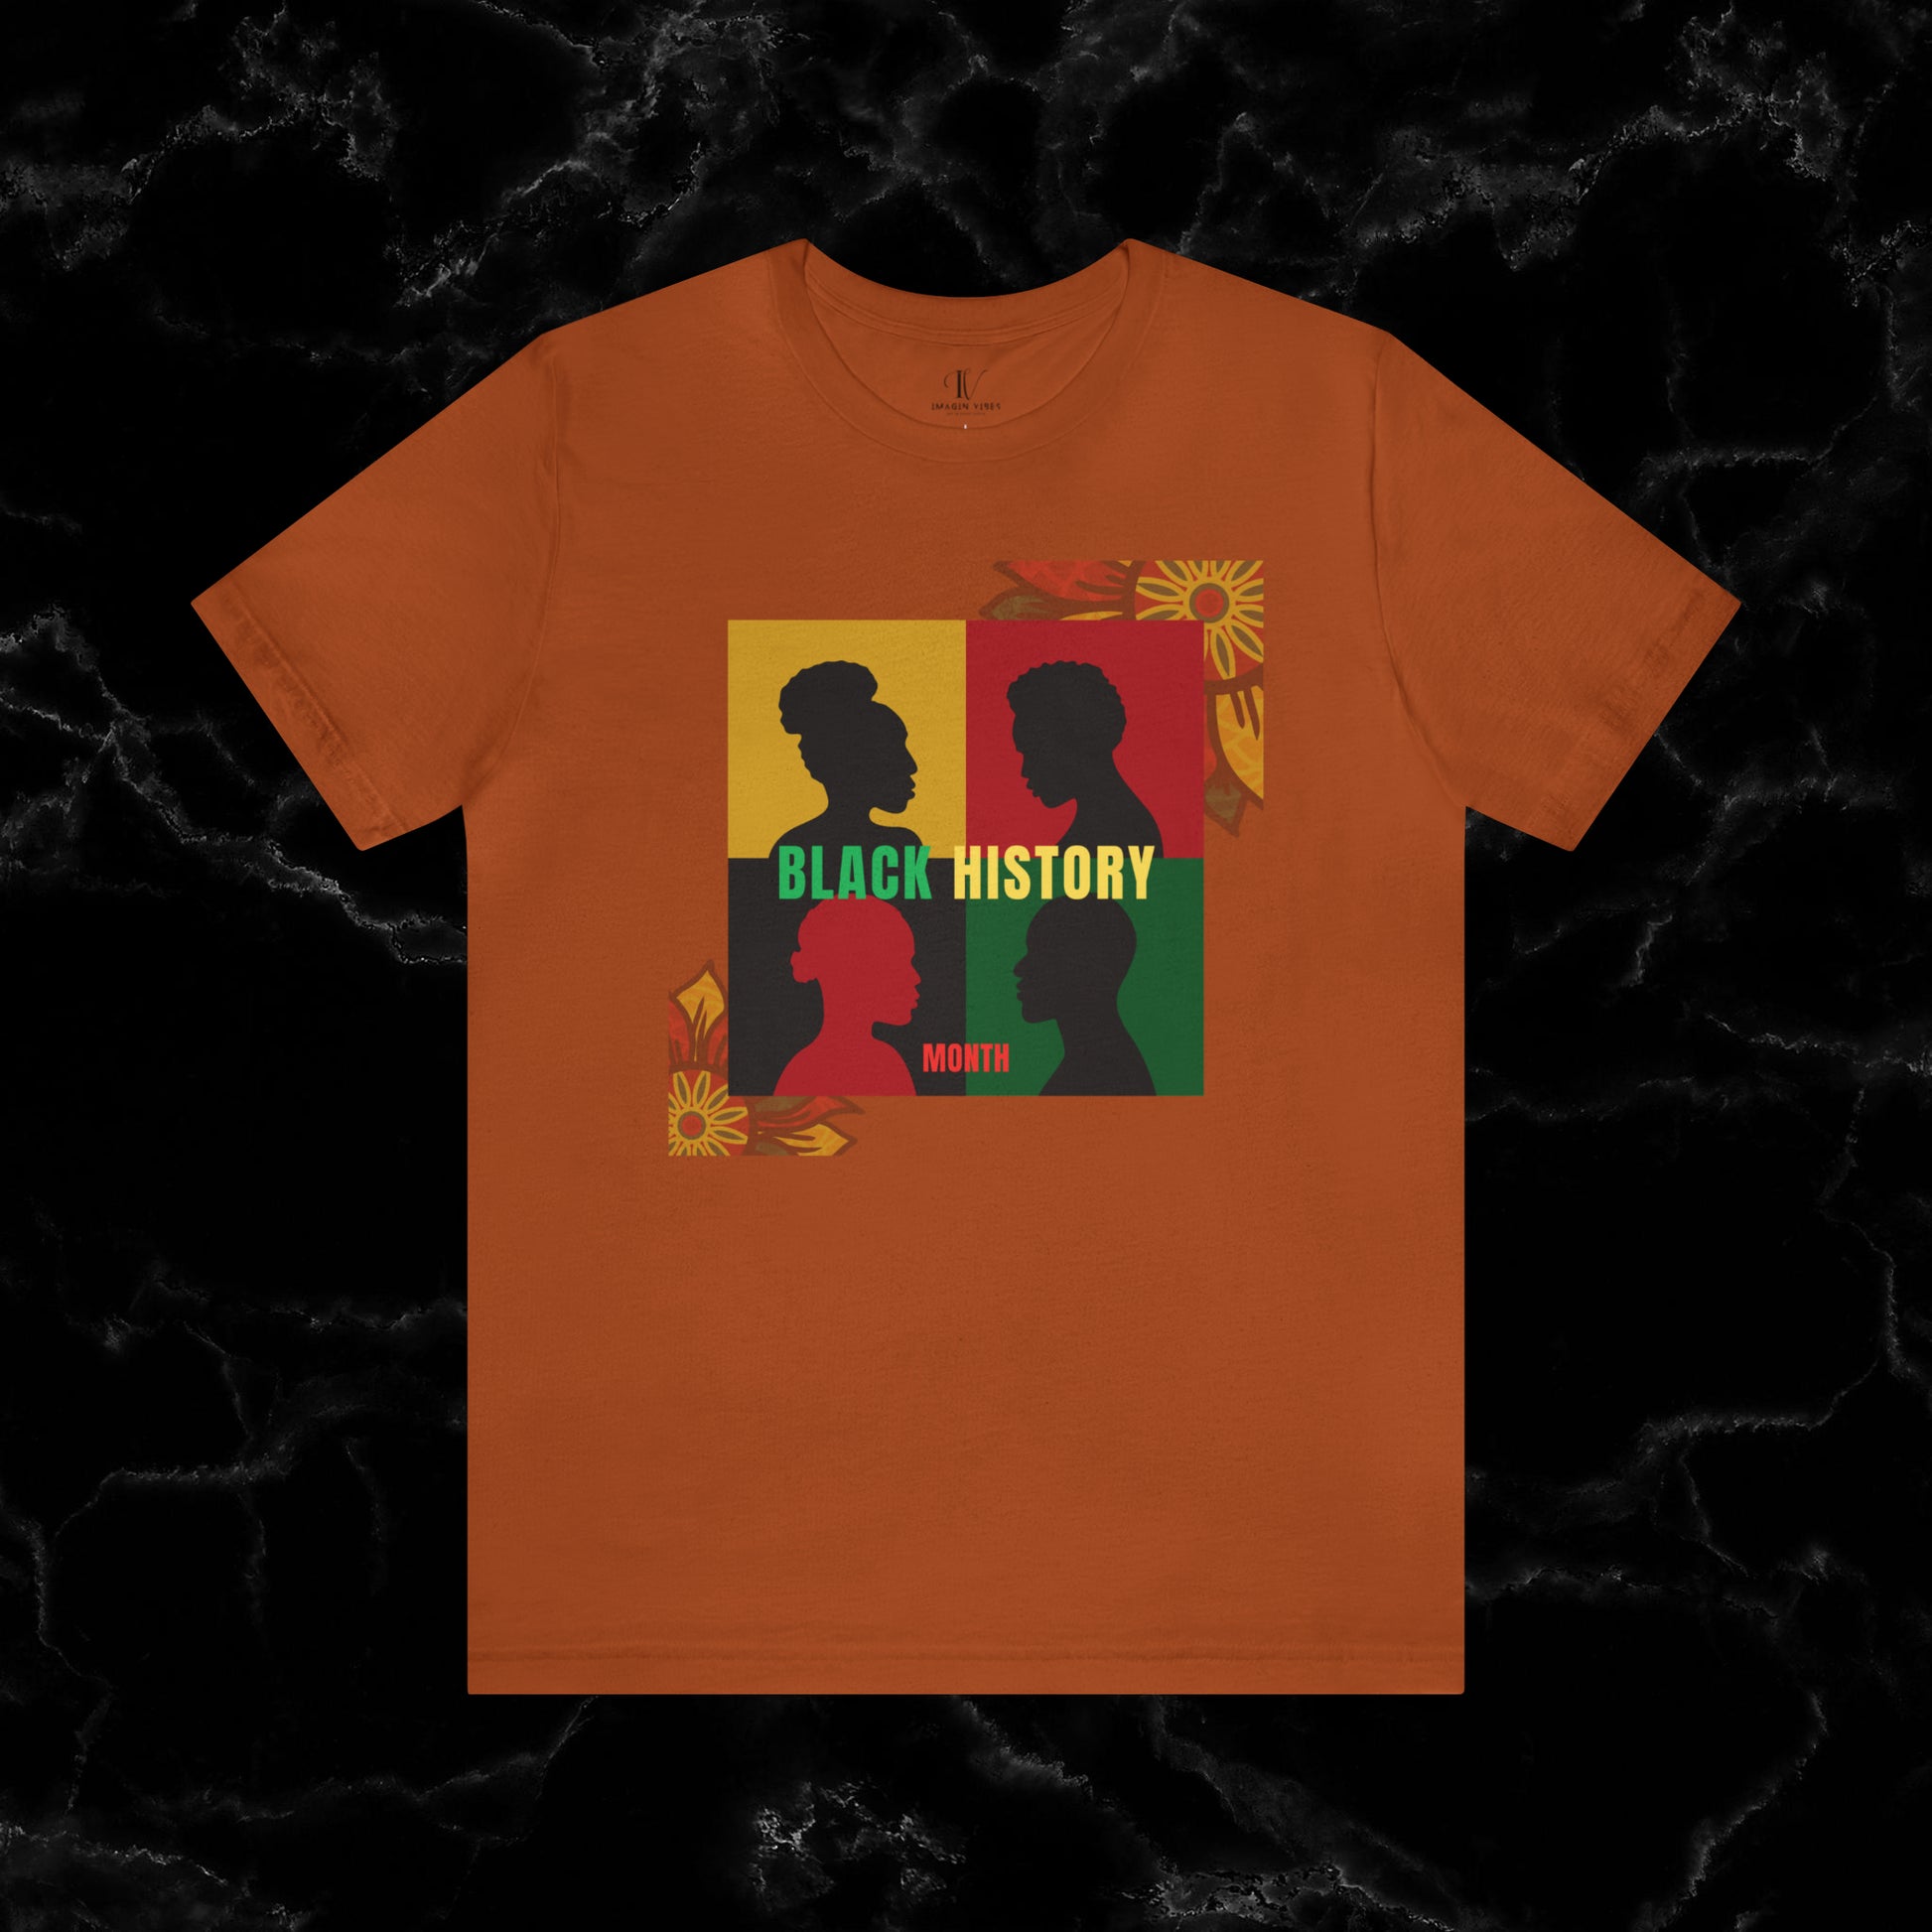 Trendy Black History Month Shirts Celebrating African American Pride and Heritage T-Shirt Autumn XS 